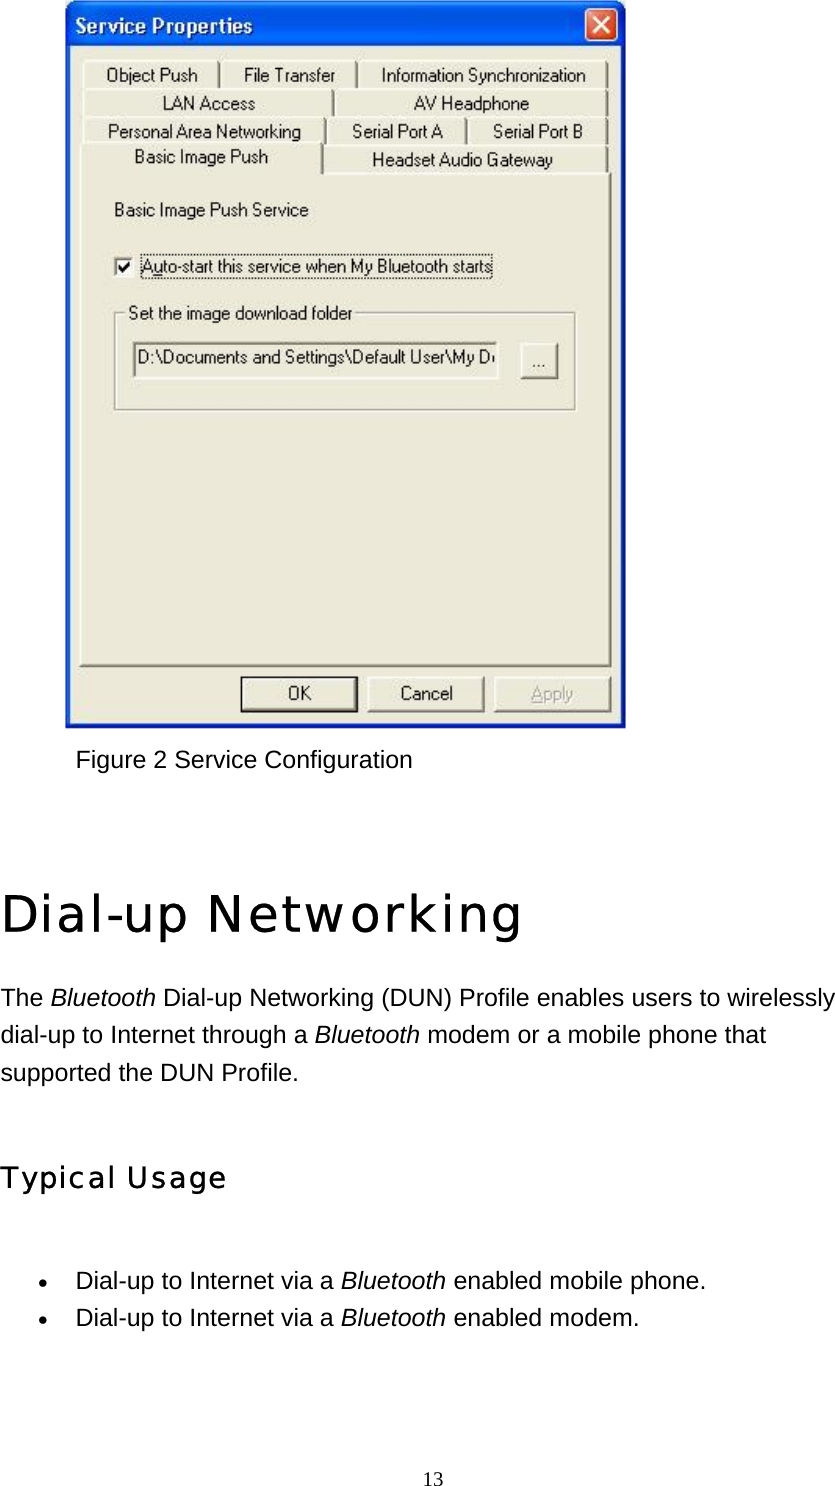   13                     Figure 2 Service Configuration   Dial-up Networking The Bluetooth Dial-up Networking (DUN) Profile enables users to wirelessly dial-up to Internet through a Bluetooth modem or a mobile phone that supported the DUN Profile. Typical Usage • Dial-up to Internet via a Bluetooth enabled mobile phone.   • Dial-up to Internet via a Bluetooth enabled modem.   